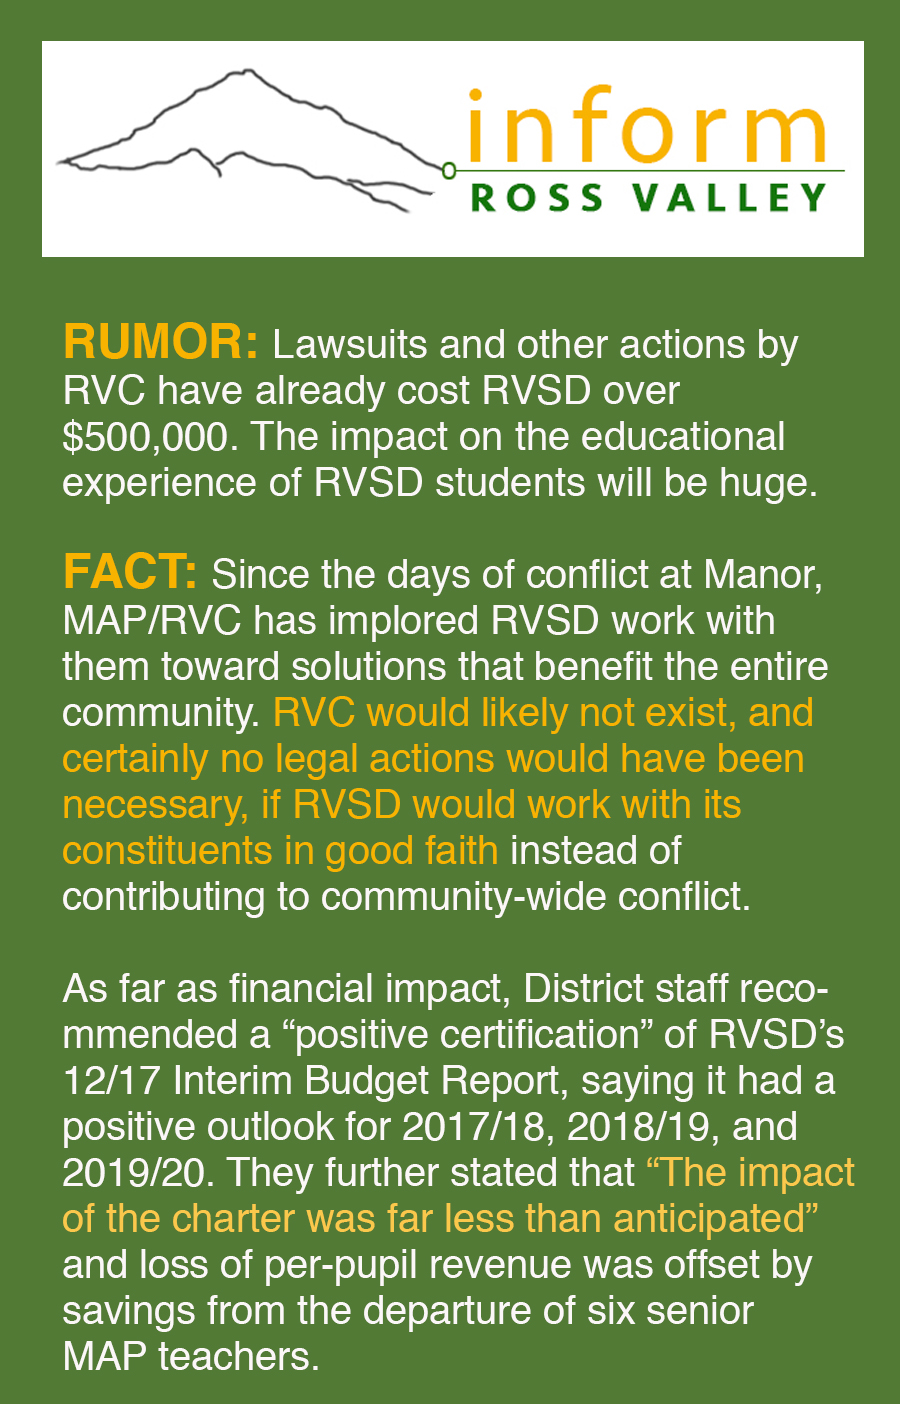 As far as financial impact, District staff reco- mmended a “positive certification” of RVSD’s 12/17 Interim Budget Report, saying it had a positive outlook for 2017/18, 2018/19, and 2019/20. They further stated that “The impact of the charter was far less than anticipated” and loss of per-pupil revenue was offset by savings from the departure of six senior MAP teachers.